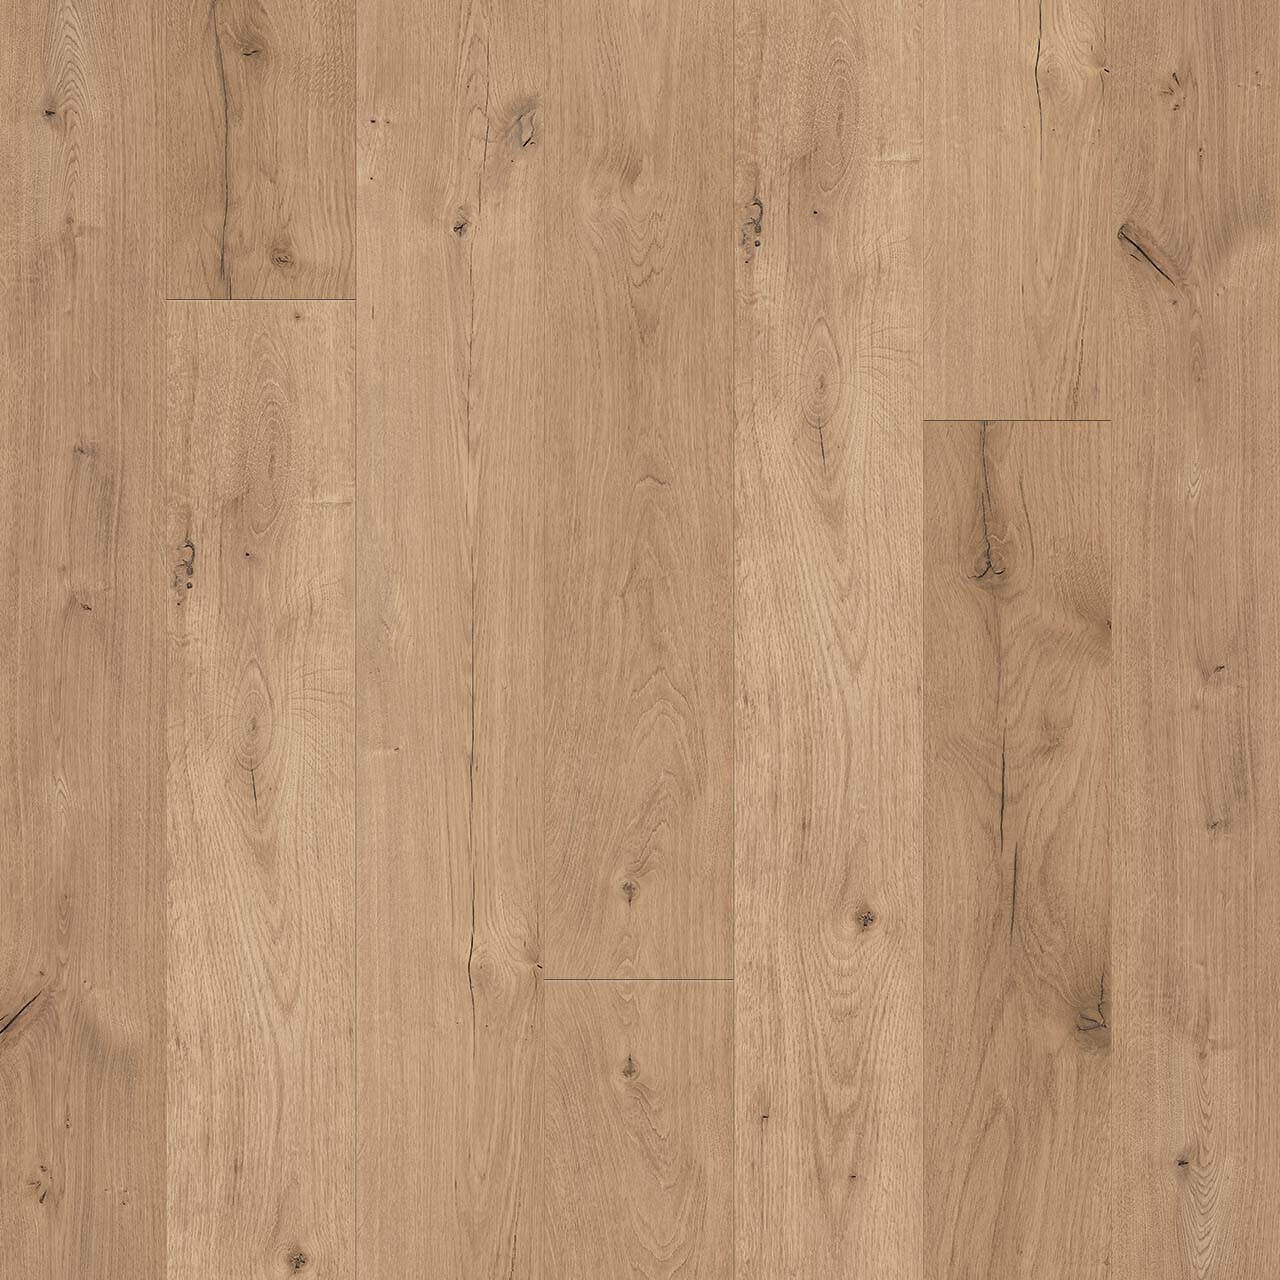  Engineered Floors - Wood Tech Collection - 7 in. x 54 in. - Pine Island